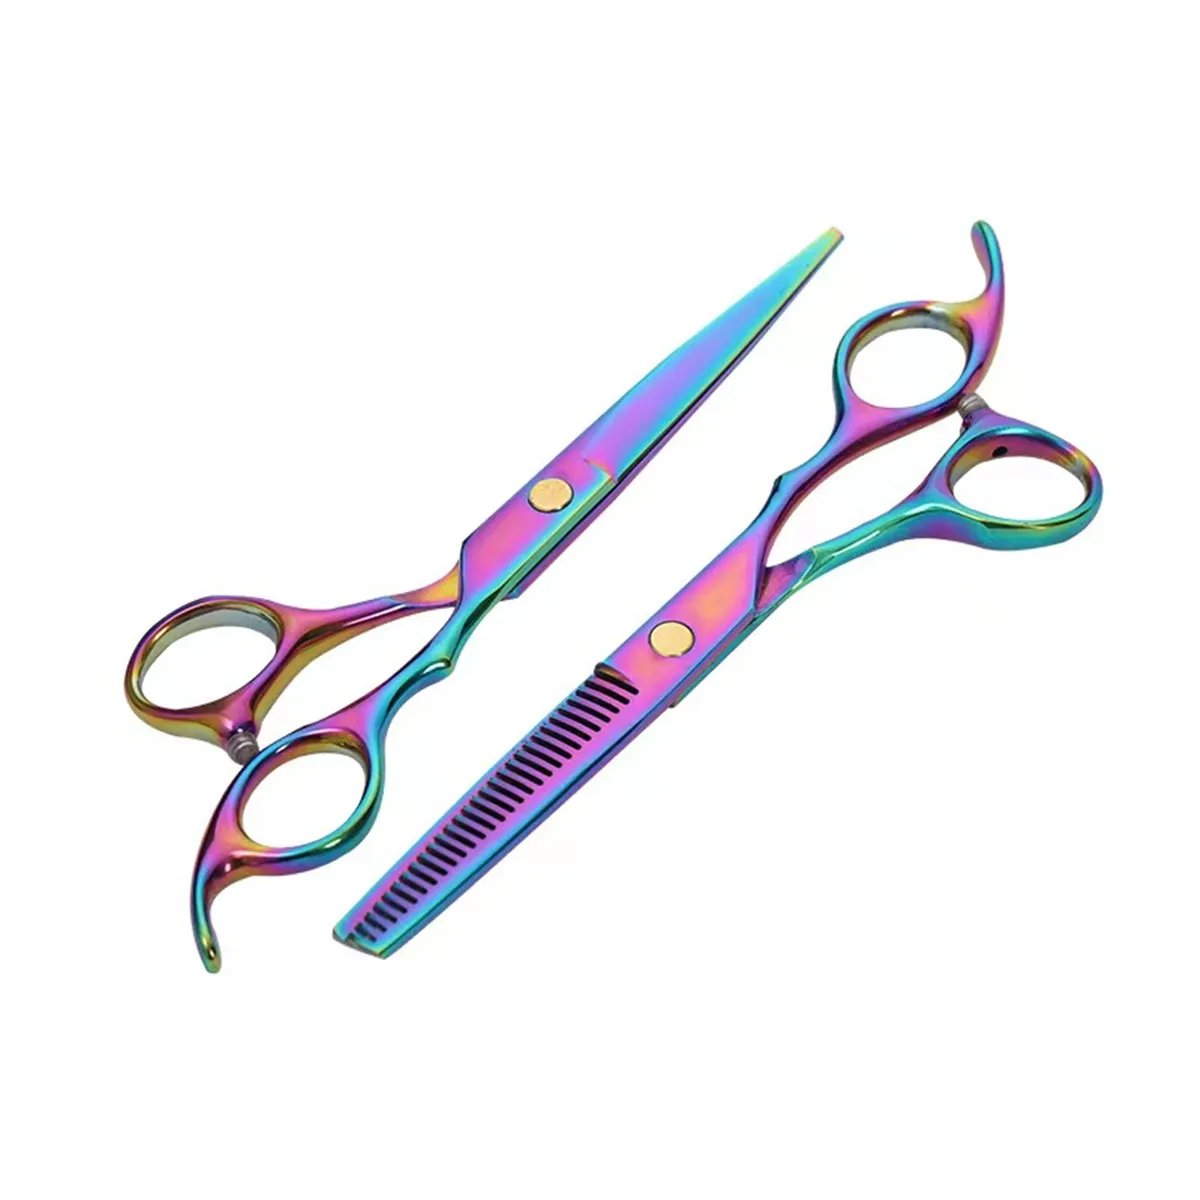 Professional Stainless Steel 6 Inch Salon Hairdressing Scissor Hair Cutting Shears Cut Thinning Scissors